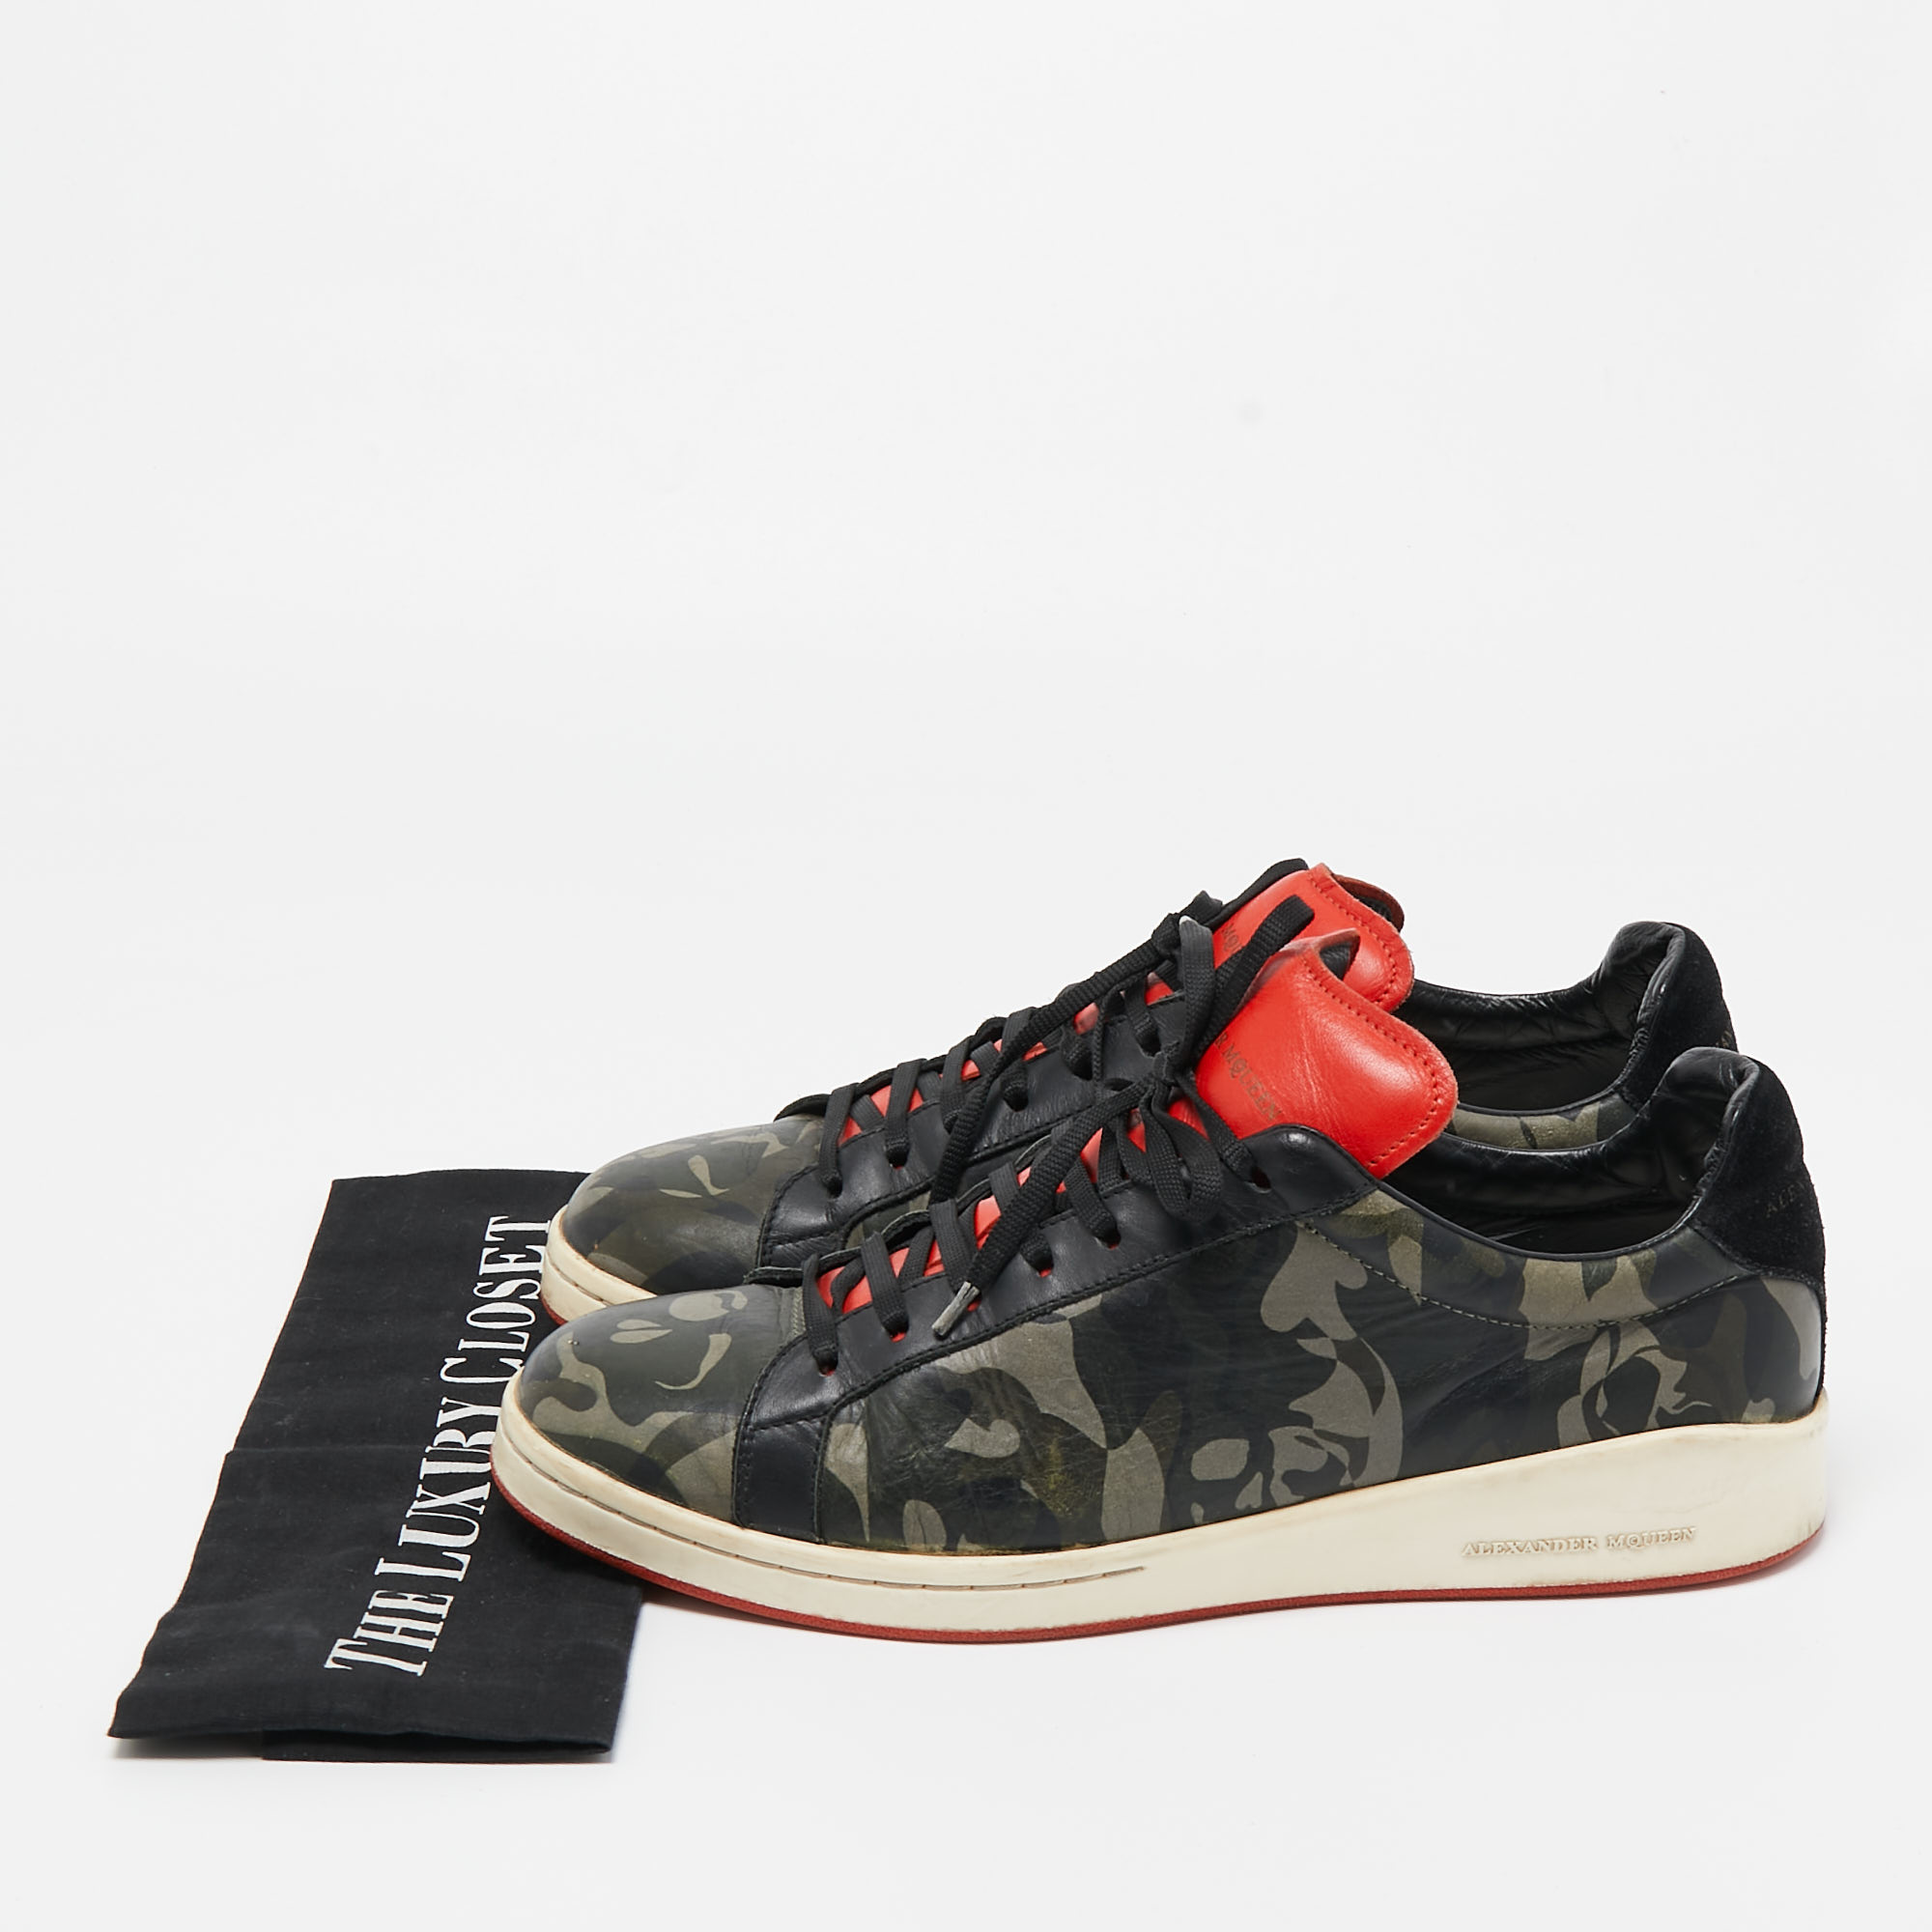 Alexander MQueen Black/Red Camo Print Leather Low Top Sneakers Size 43